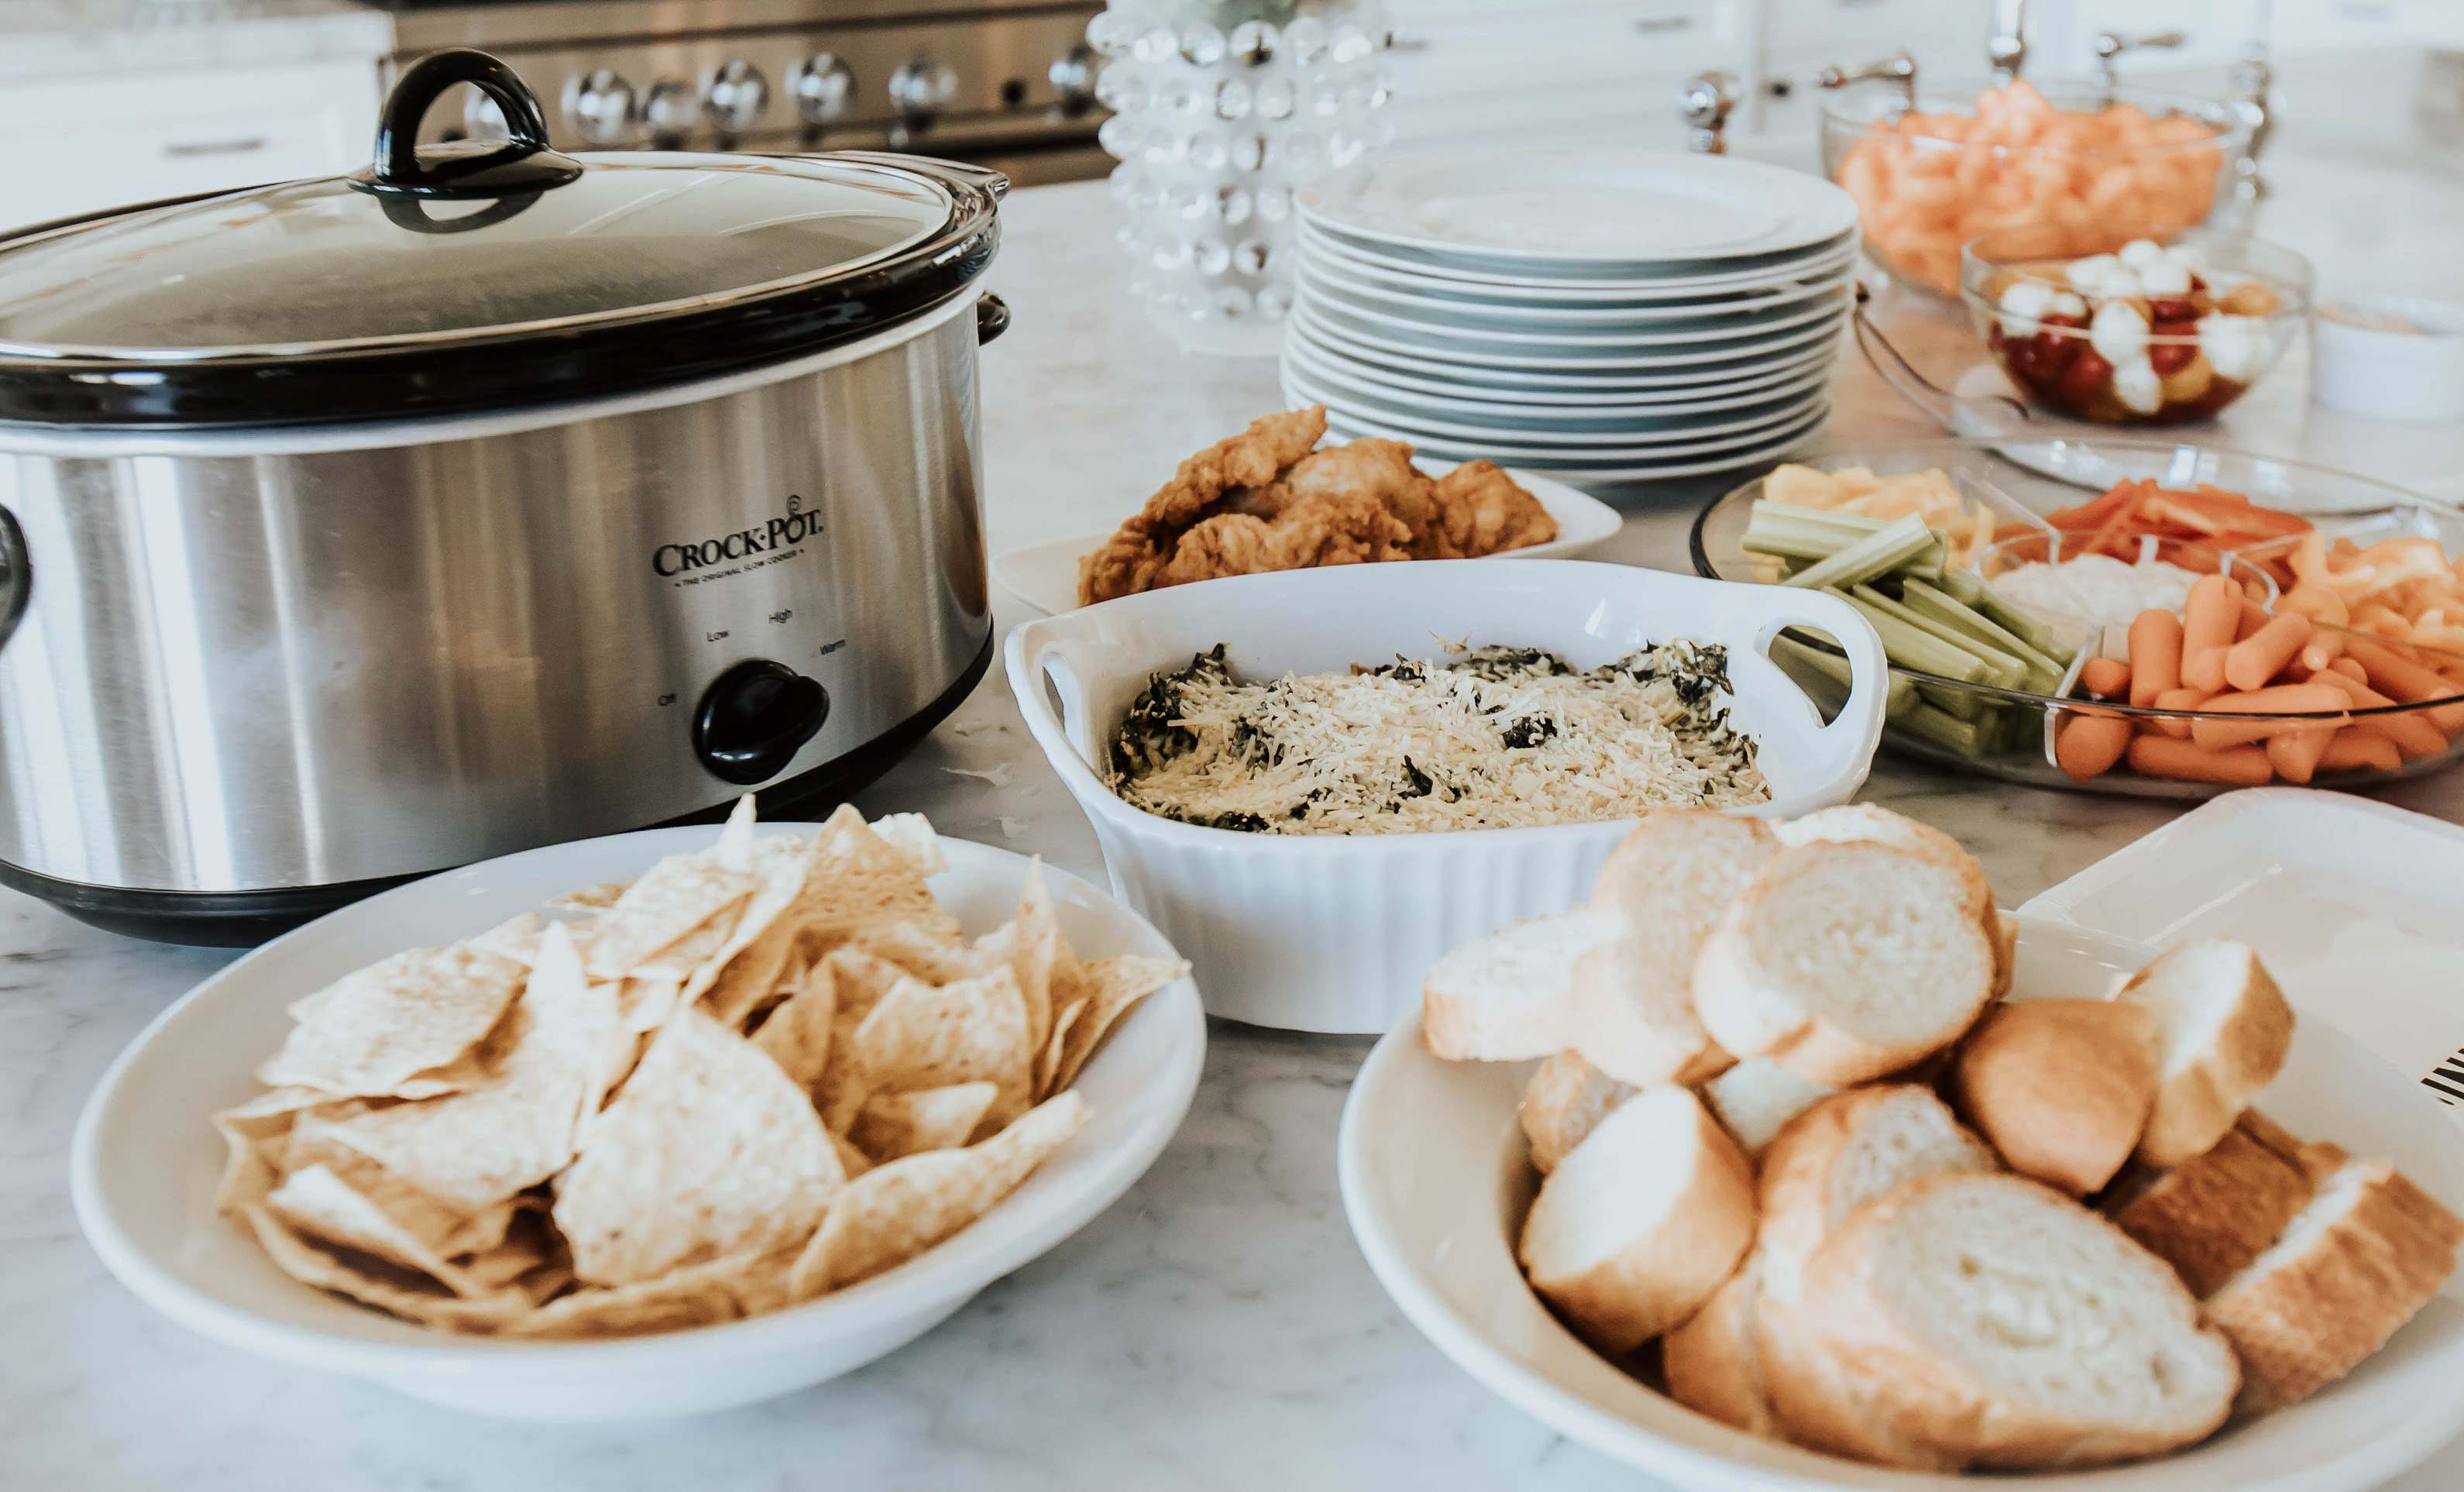 Two Peas in a Prada Bloggers, Emily Farren Wieczorek and Ashley Zeal share their favorite Super Bowl snack - this amazing healthy Spinach Artichoke Dip